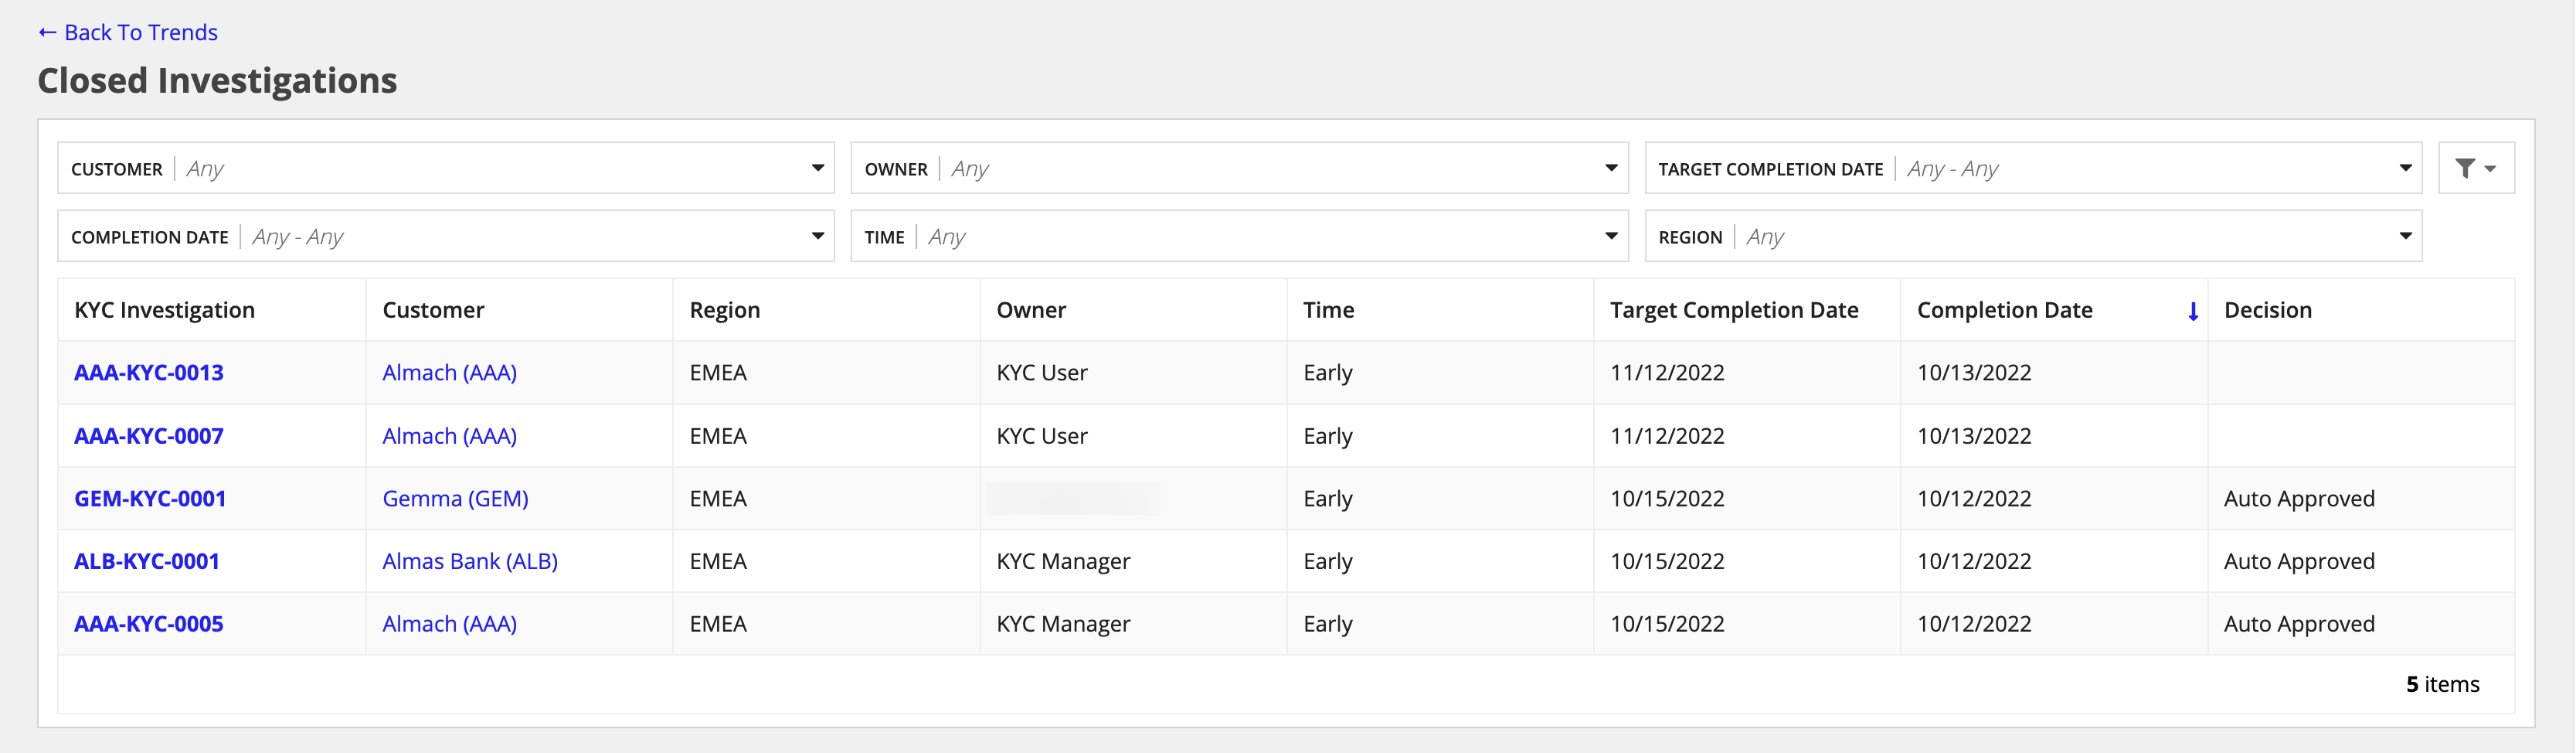 /kyc-closed investigations table